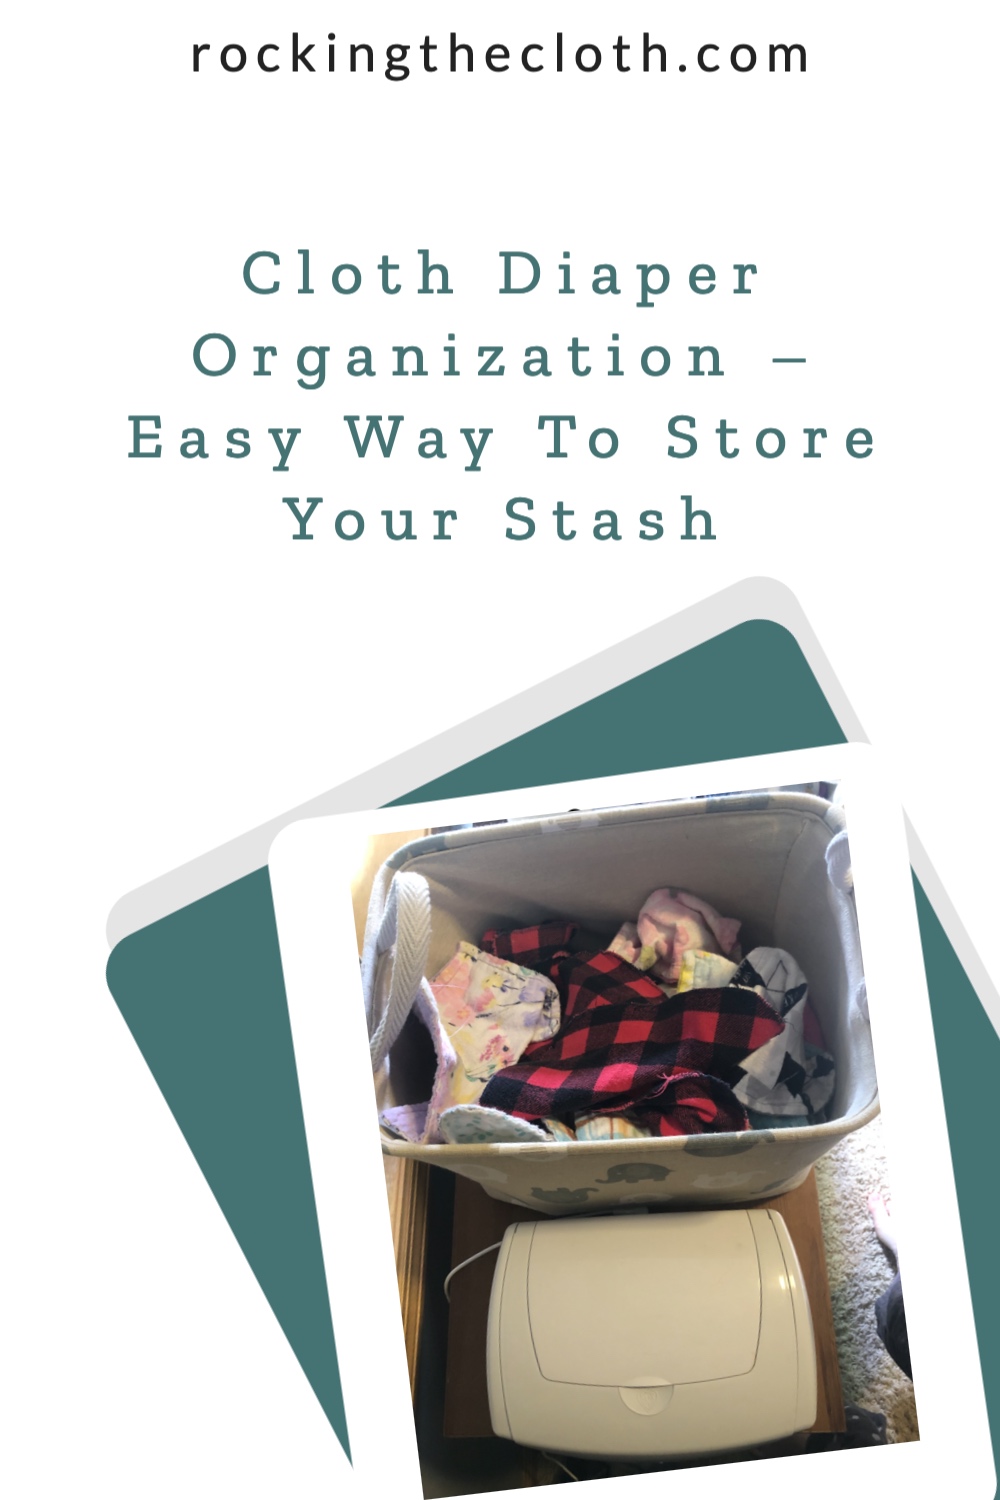 Cloth Diaper Organization – Easy Way To Store Your Stash